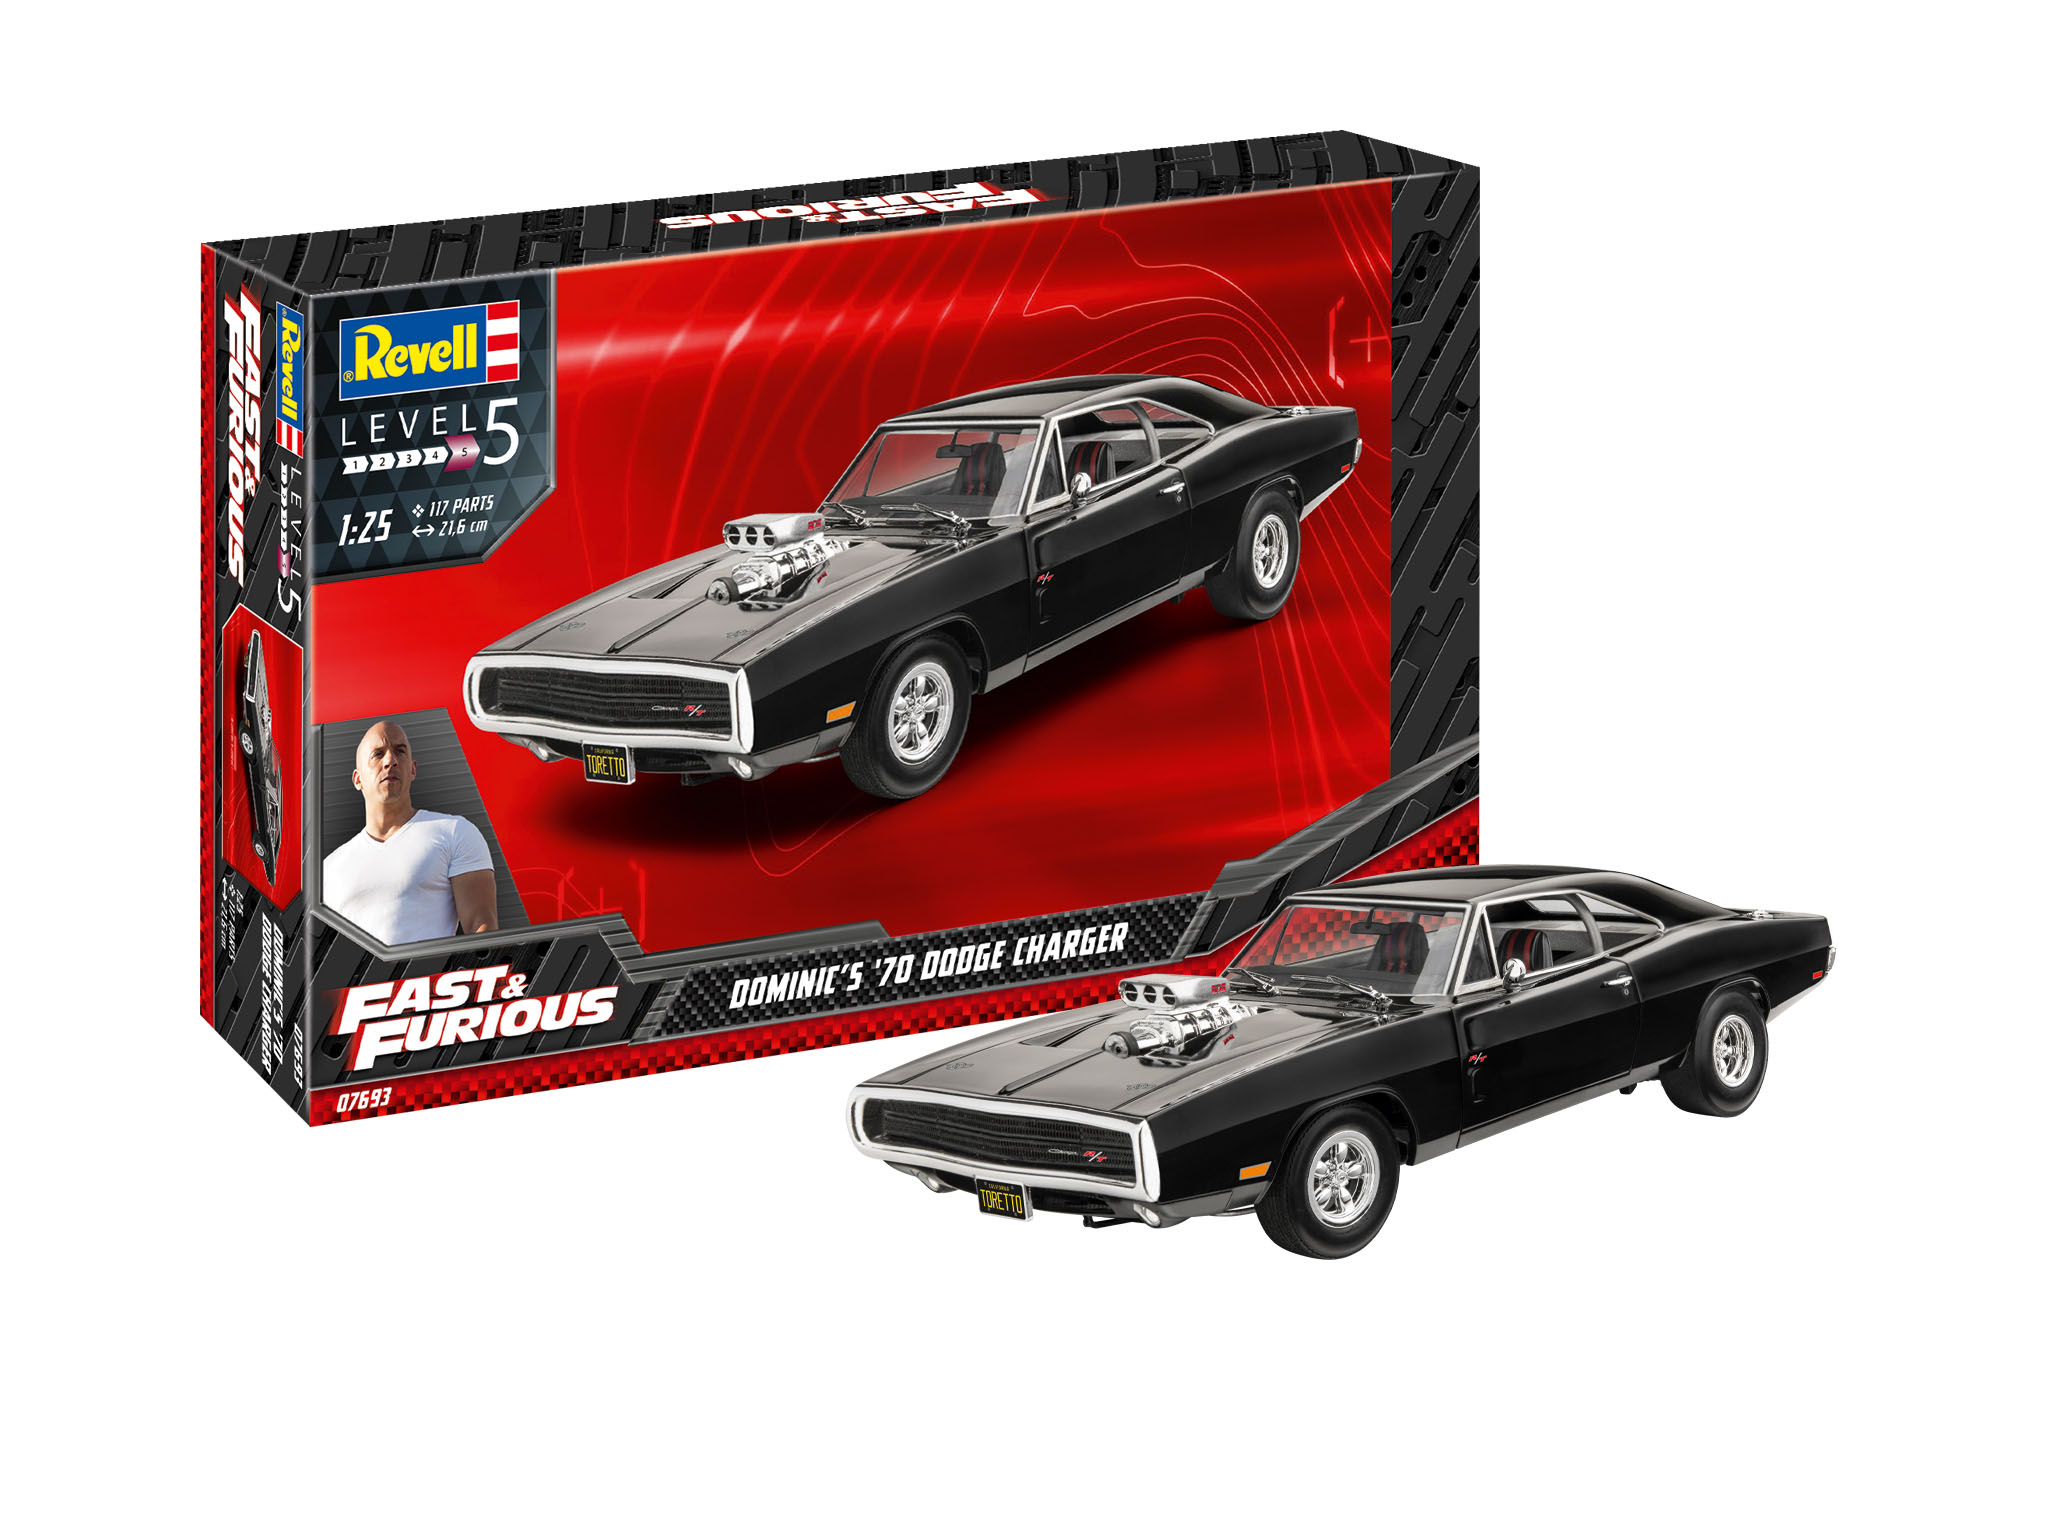 revell-07693-Fast-&-Furious-Dominics-1970-Dodge-Charger